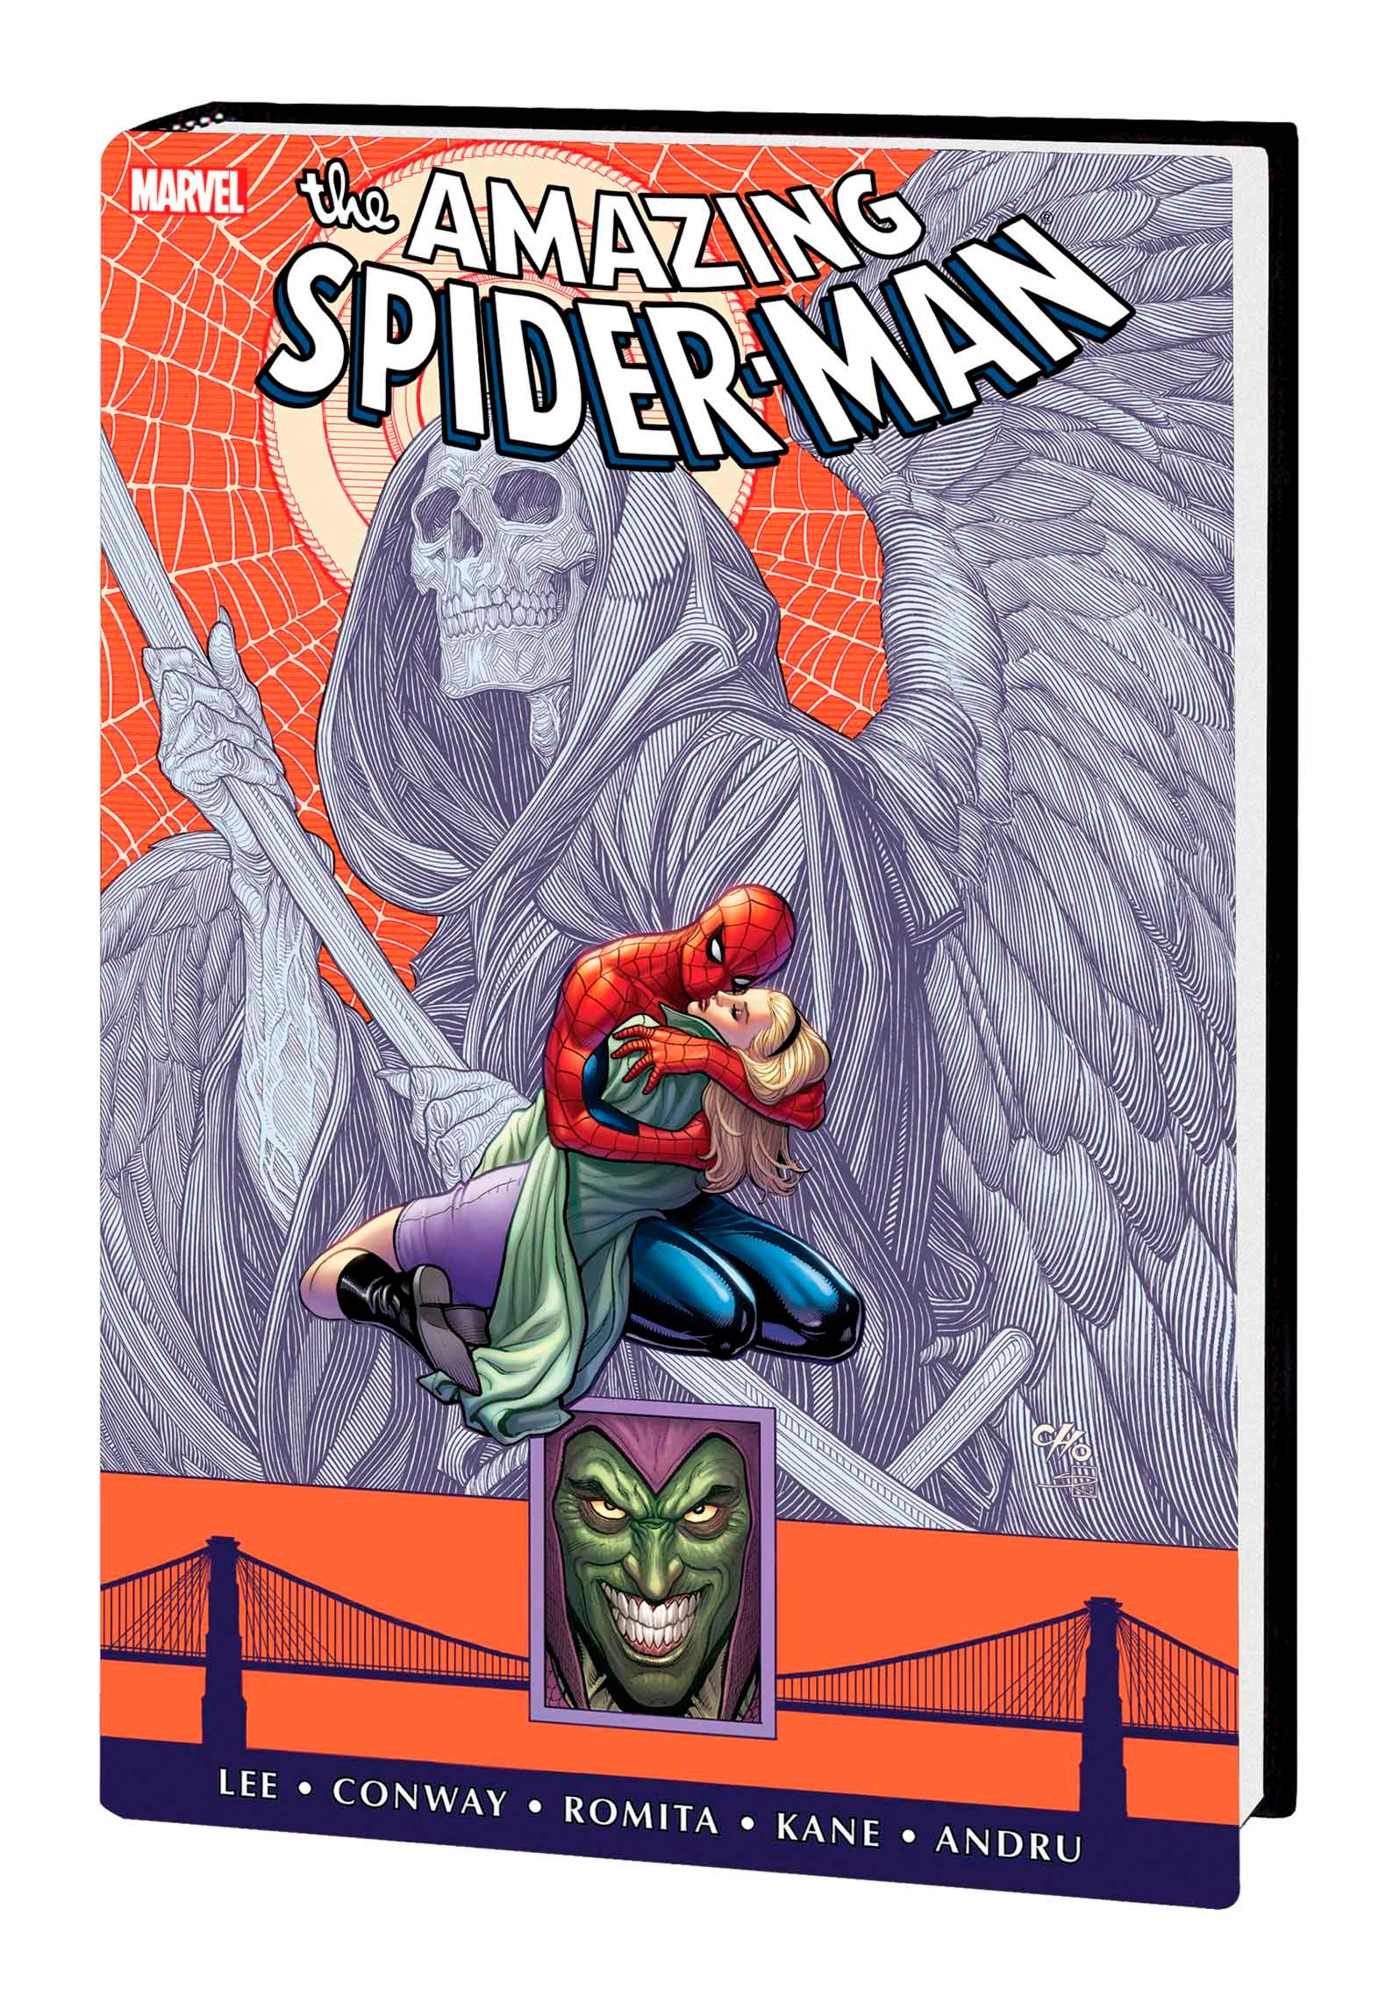 The Amazing Spider Man Omnibus Vol New Printing By Stan Lee Penguin Books New Zealand